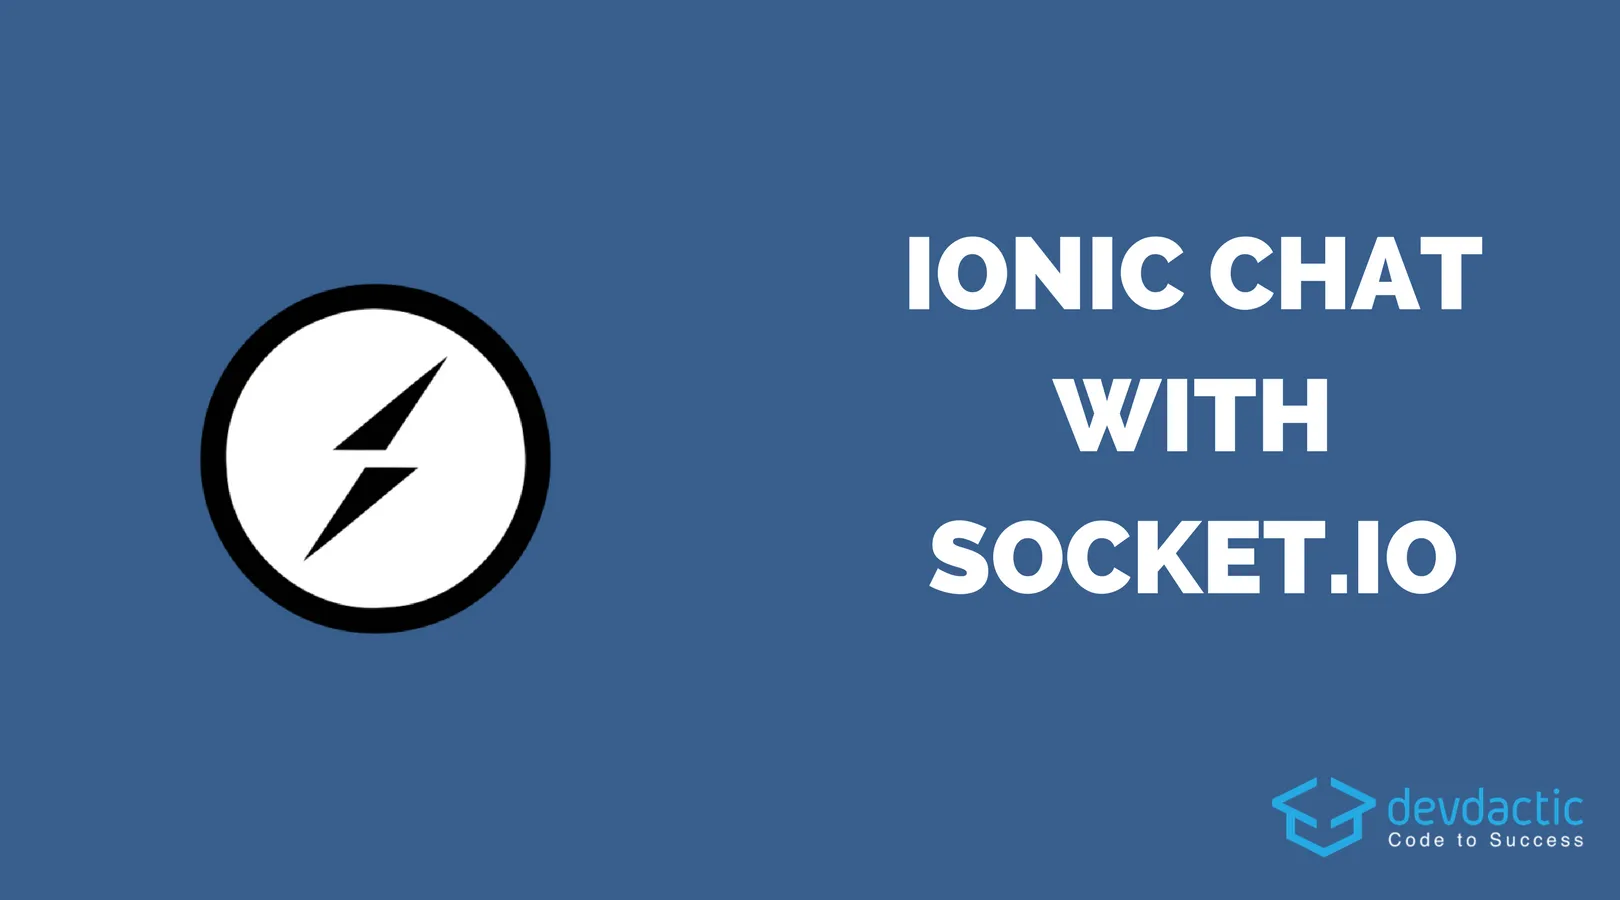 Building an Ionic Chat with Socket.io